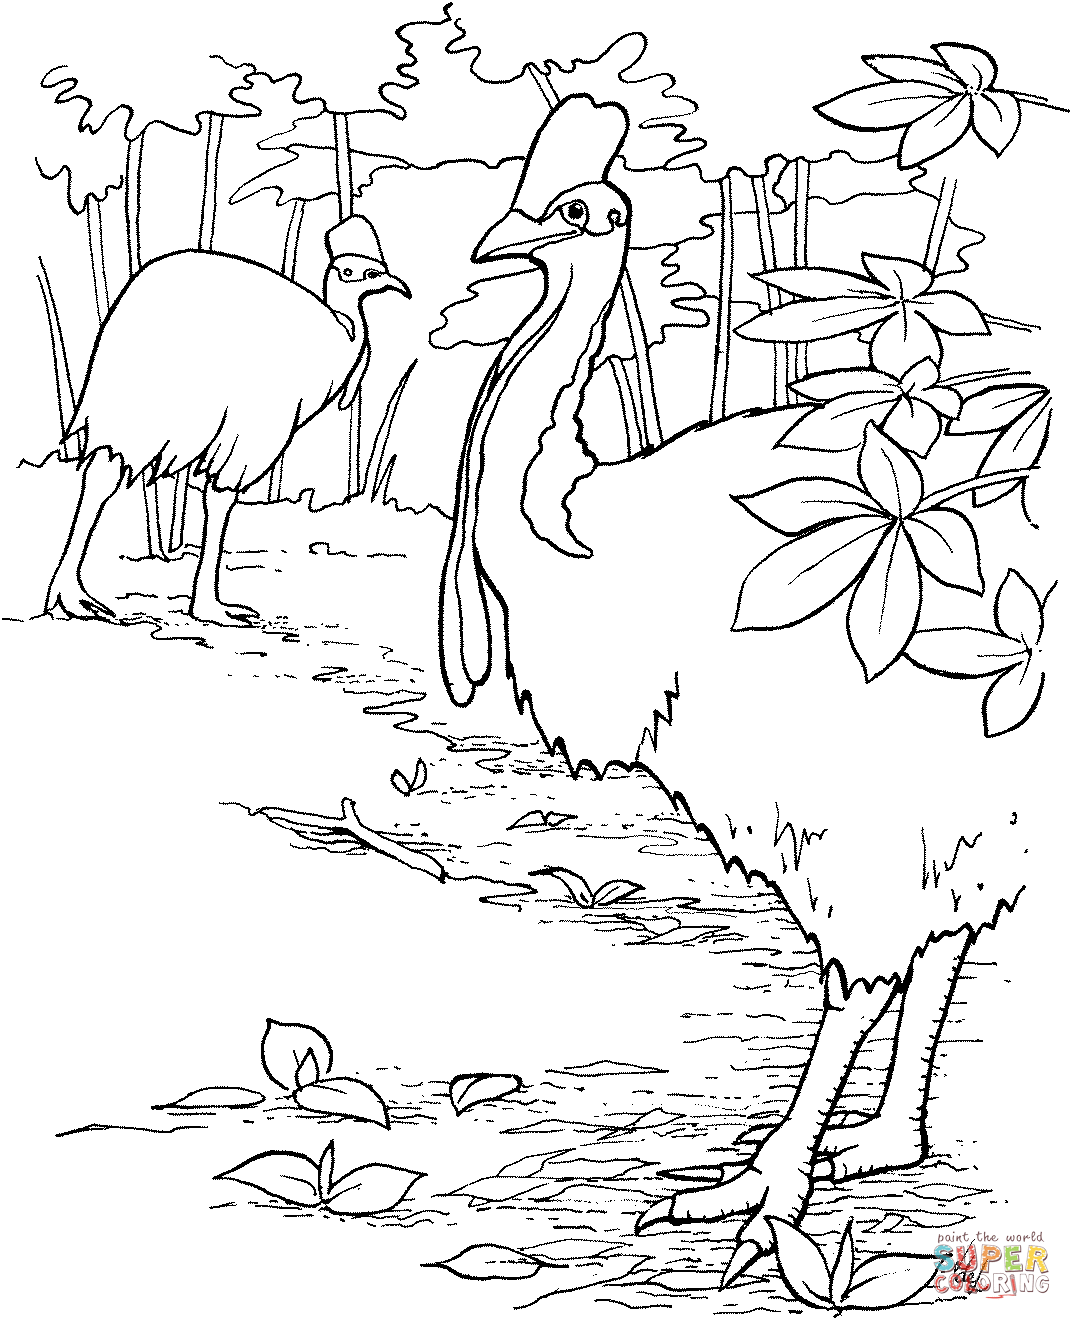 Cassowary coloring #11, Download drawings